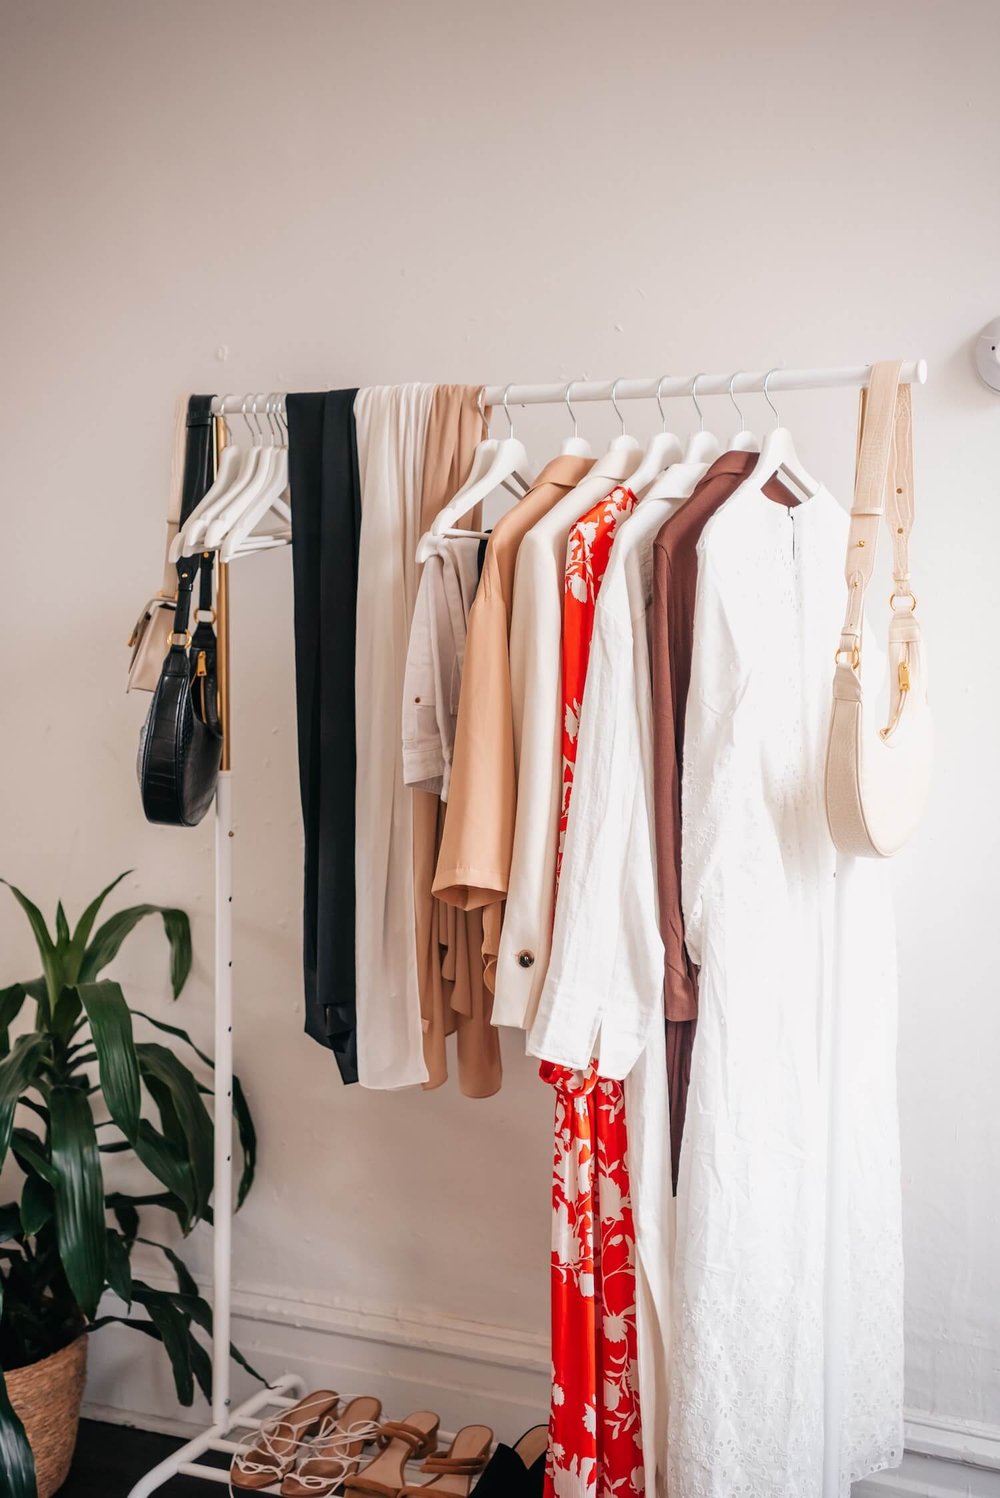 25 Closet + Bedroom Storage Ideas For Seasonal Clothing That’ll Save ...